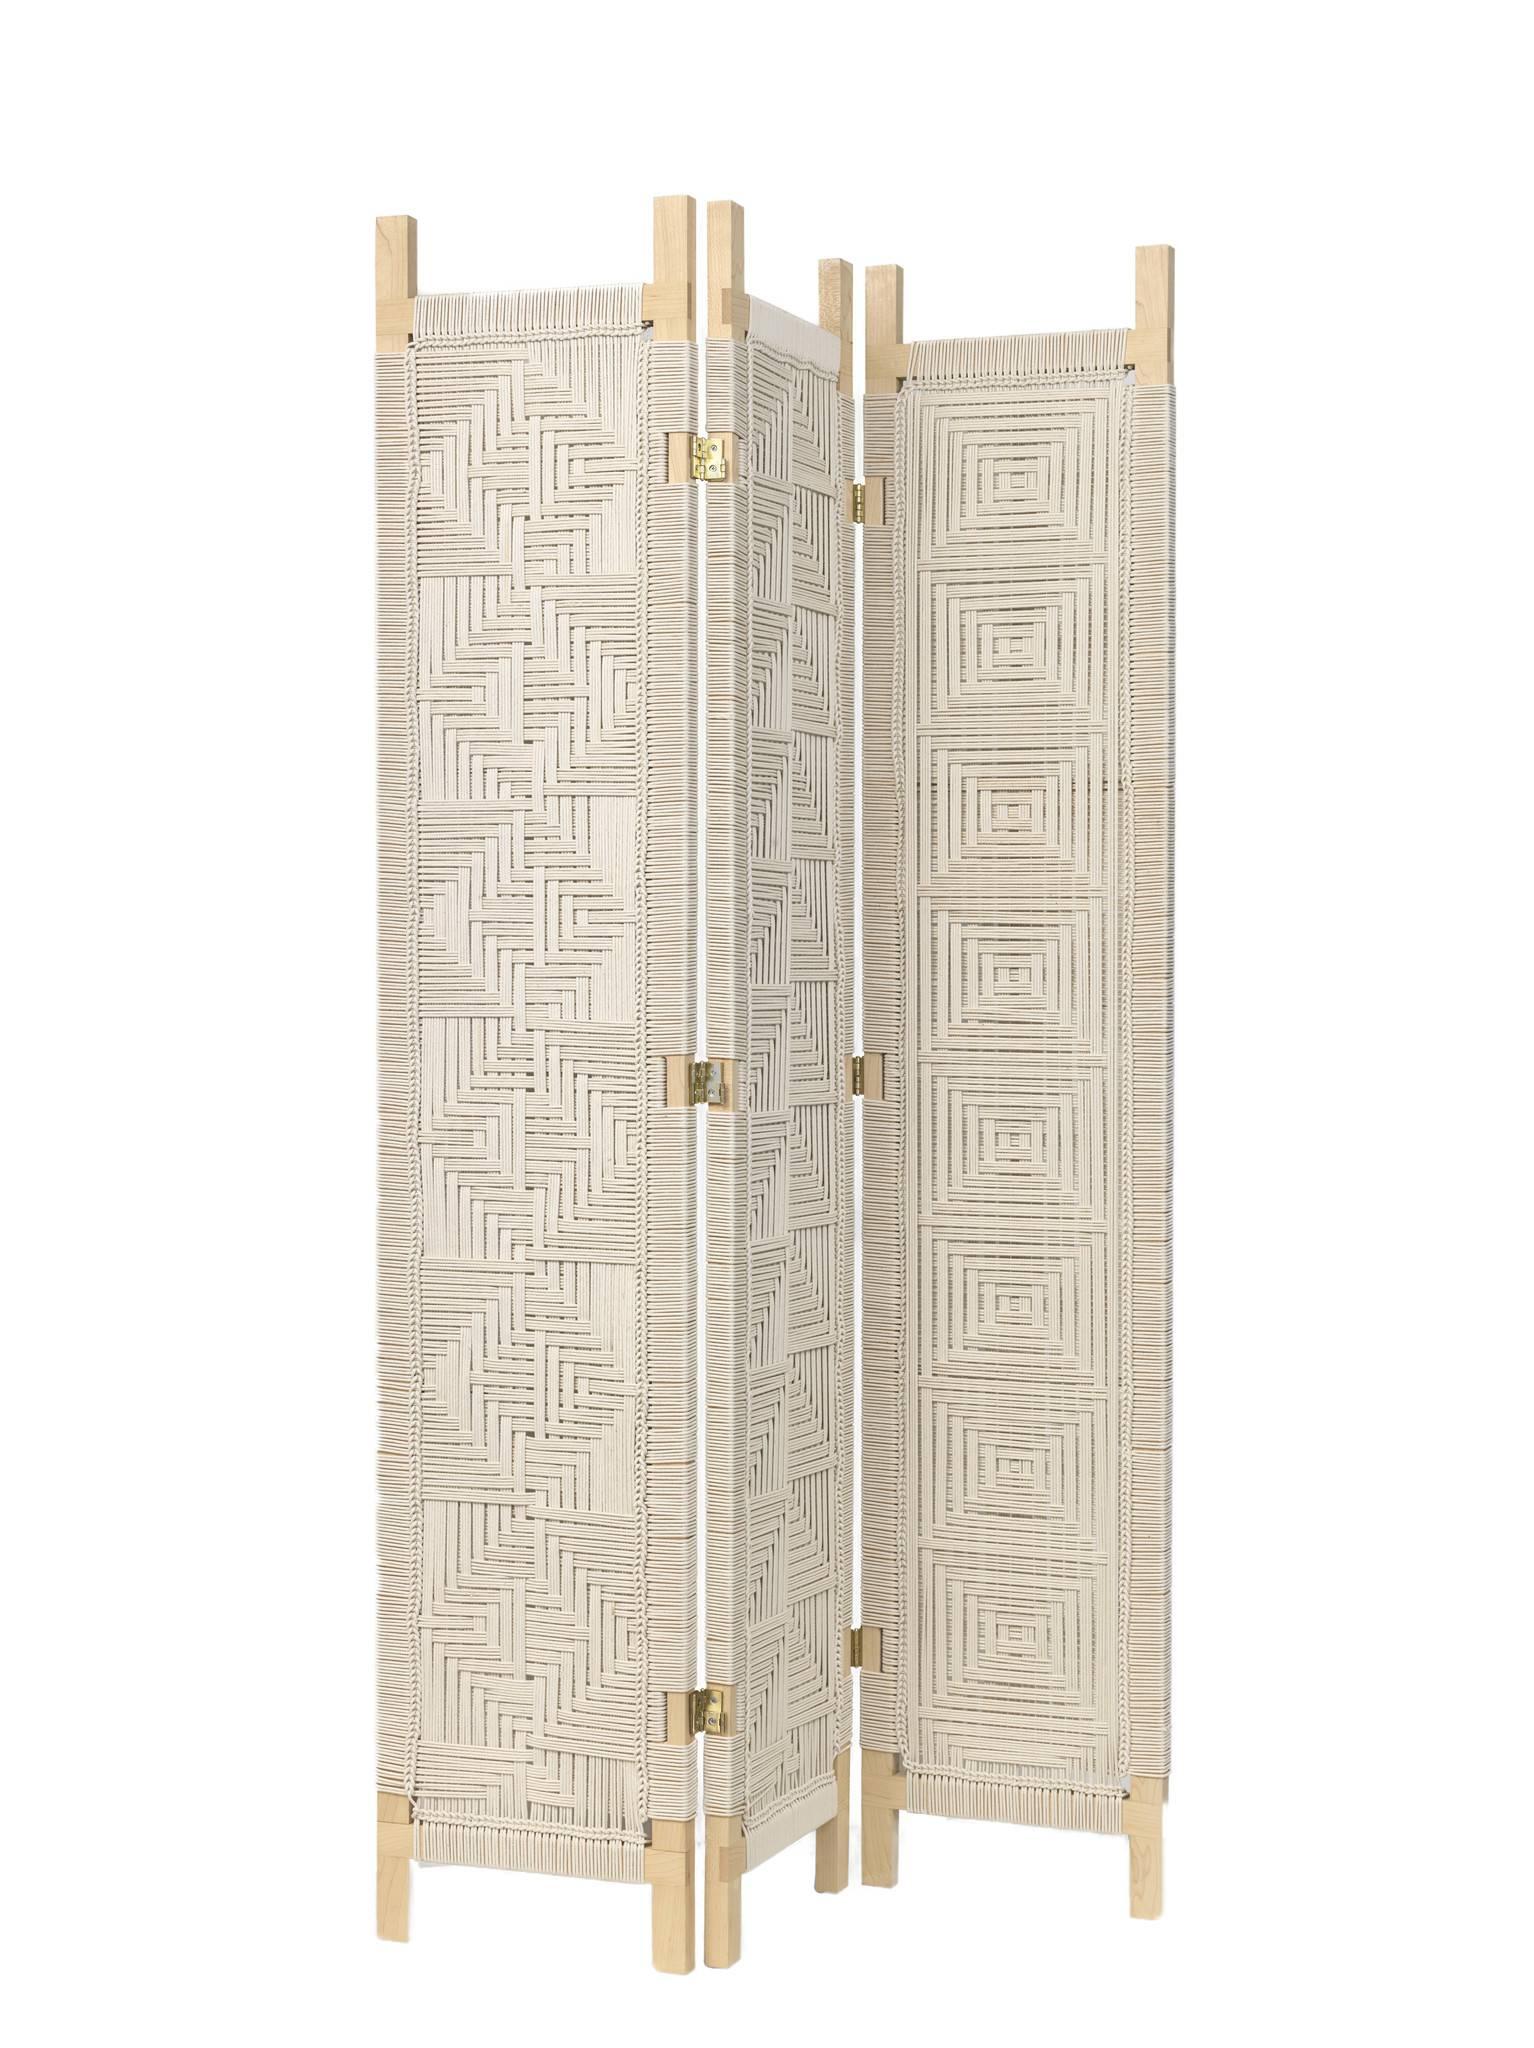 The Lassen room divider features lap joint detailing on an oiled maple frame with three handwoven panels. The divider's hinges allow each partition to swing forwards and backwards for various configurations. The cotton cord is knotted directly onto